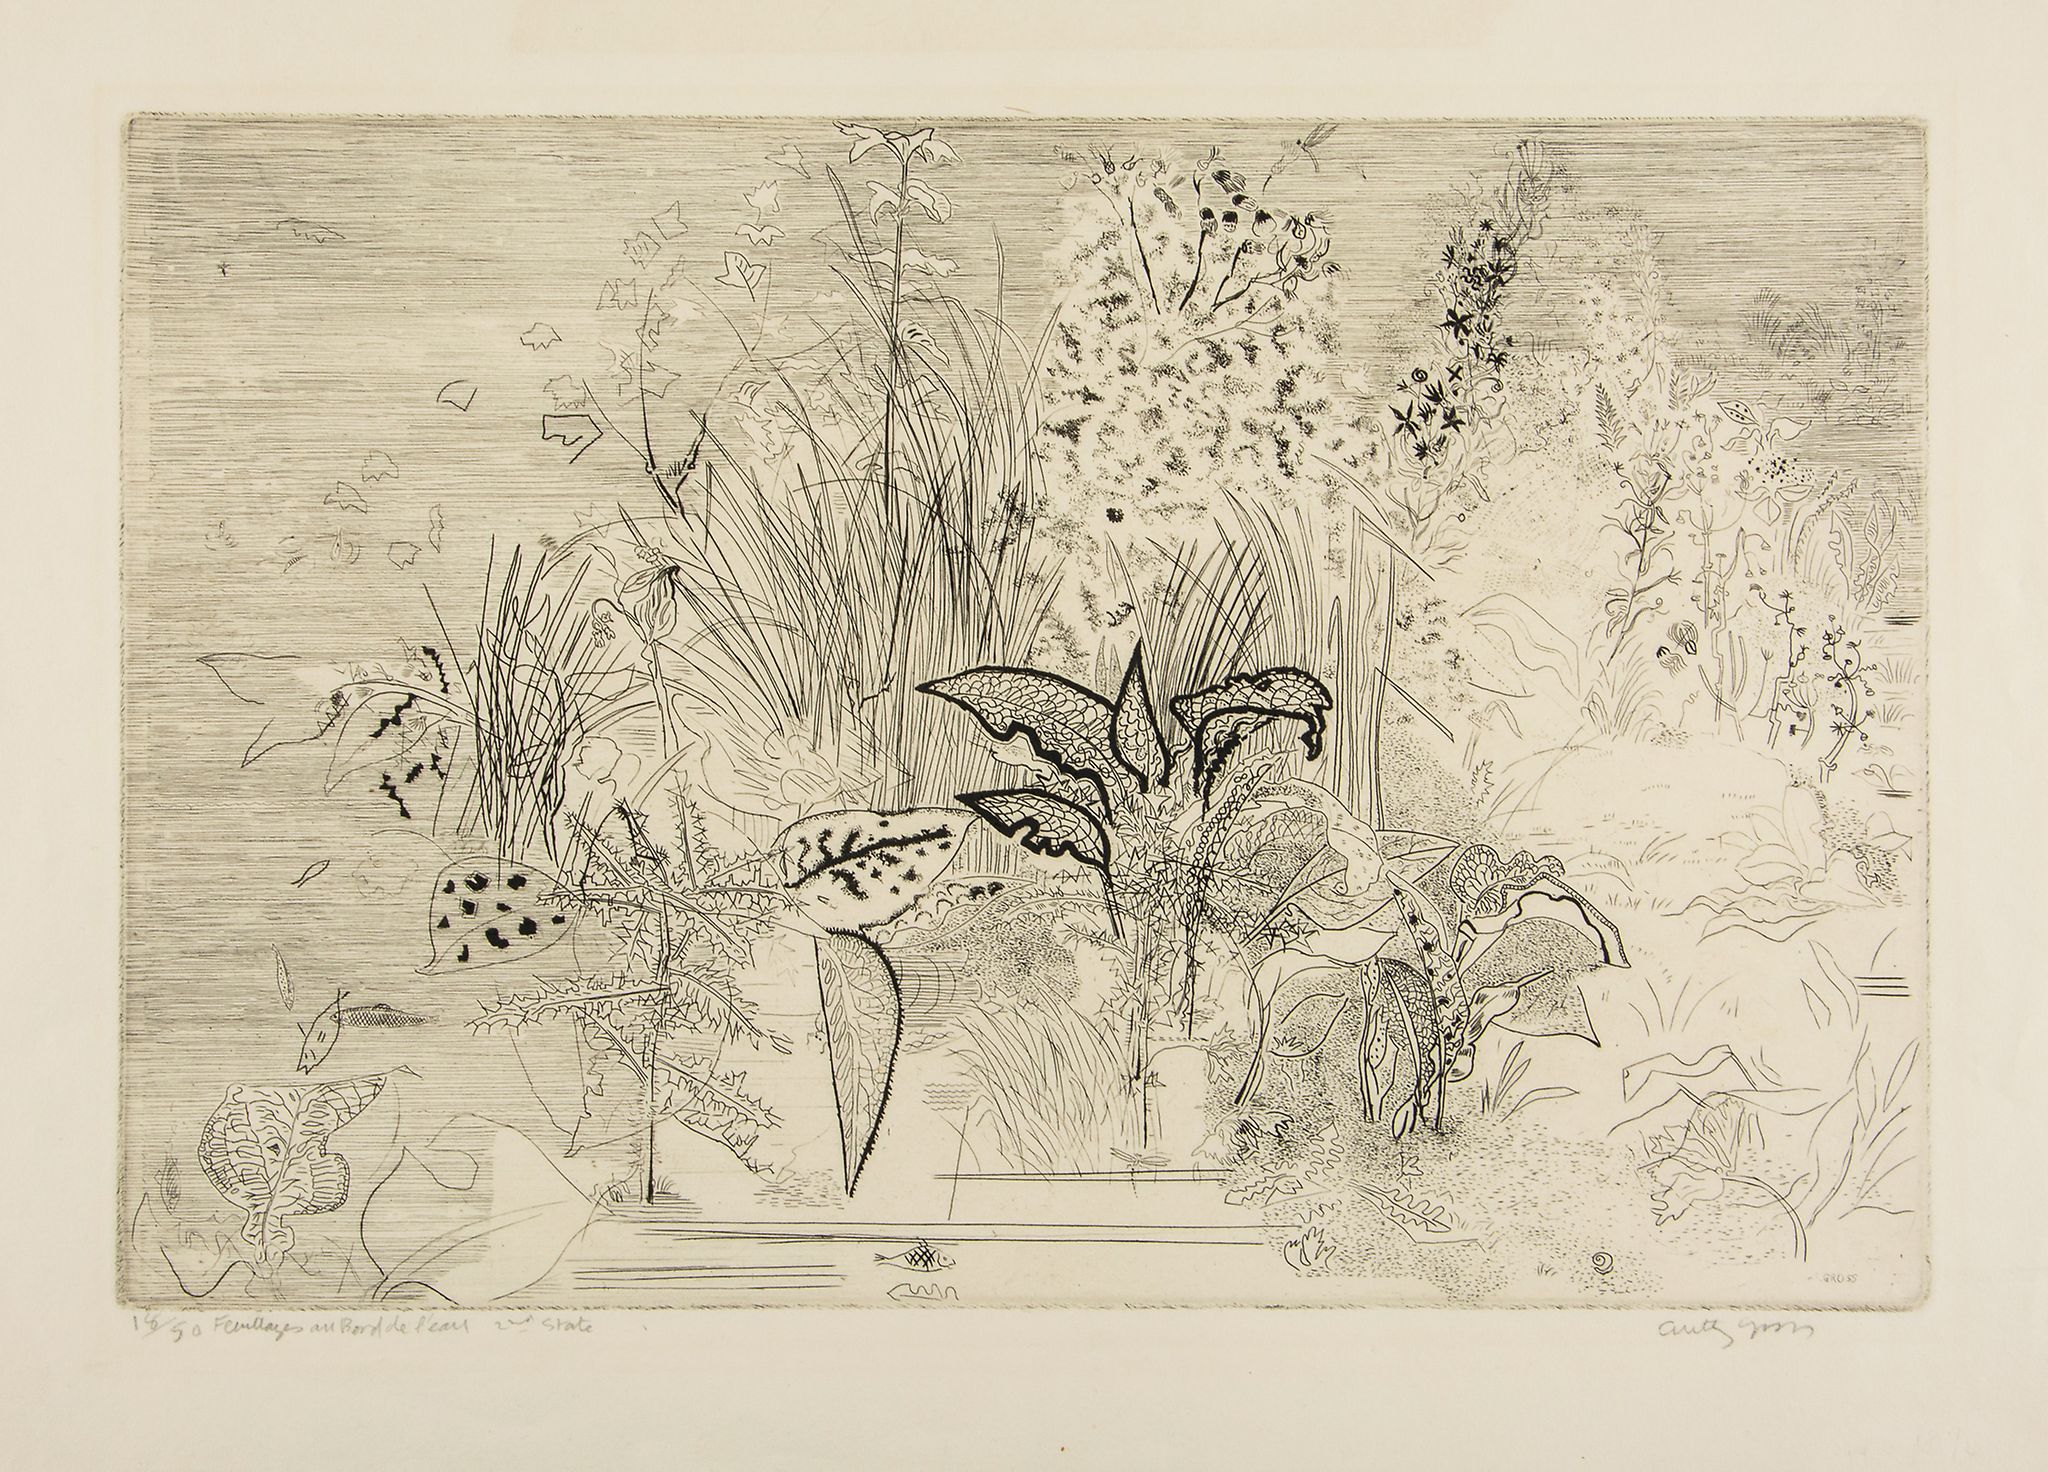 Anthony Gross (1905-1984) - Feuillages au Bord de L'eau etching, signed and titled in pencil,